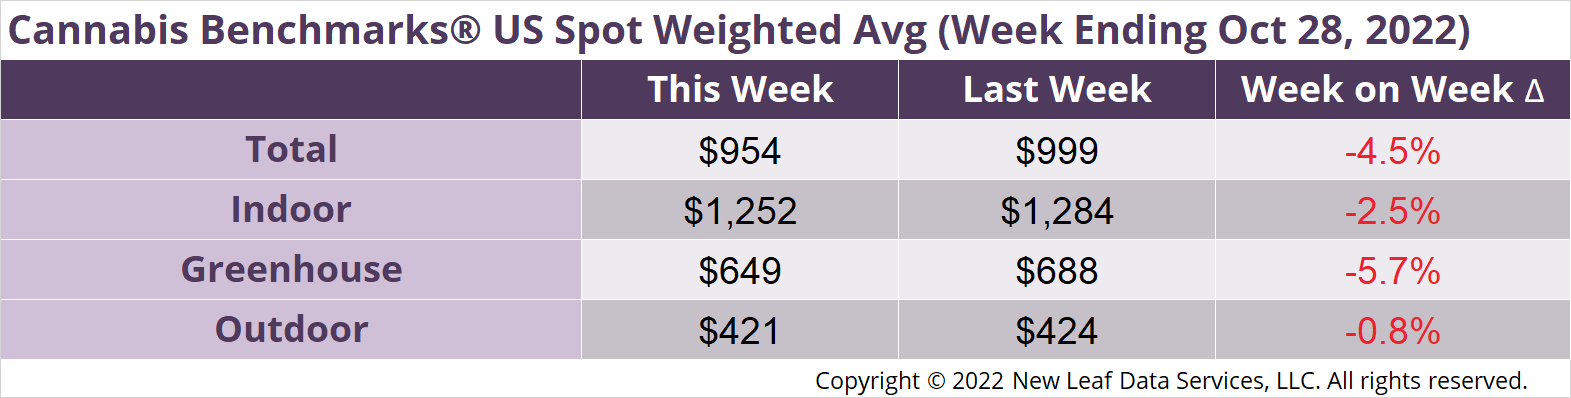 Cannabis Benchmarks U.S. Spot Weighted Average Prices October 28, 2022